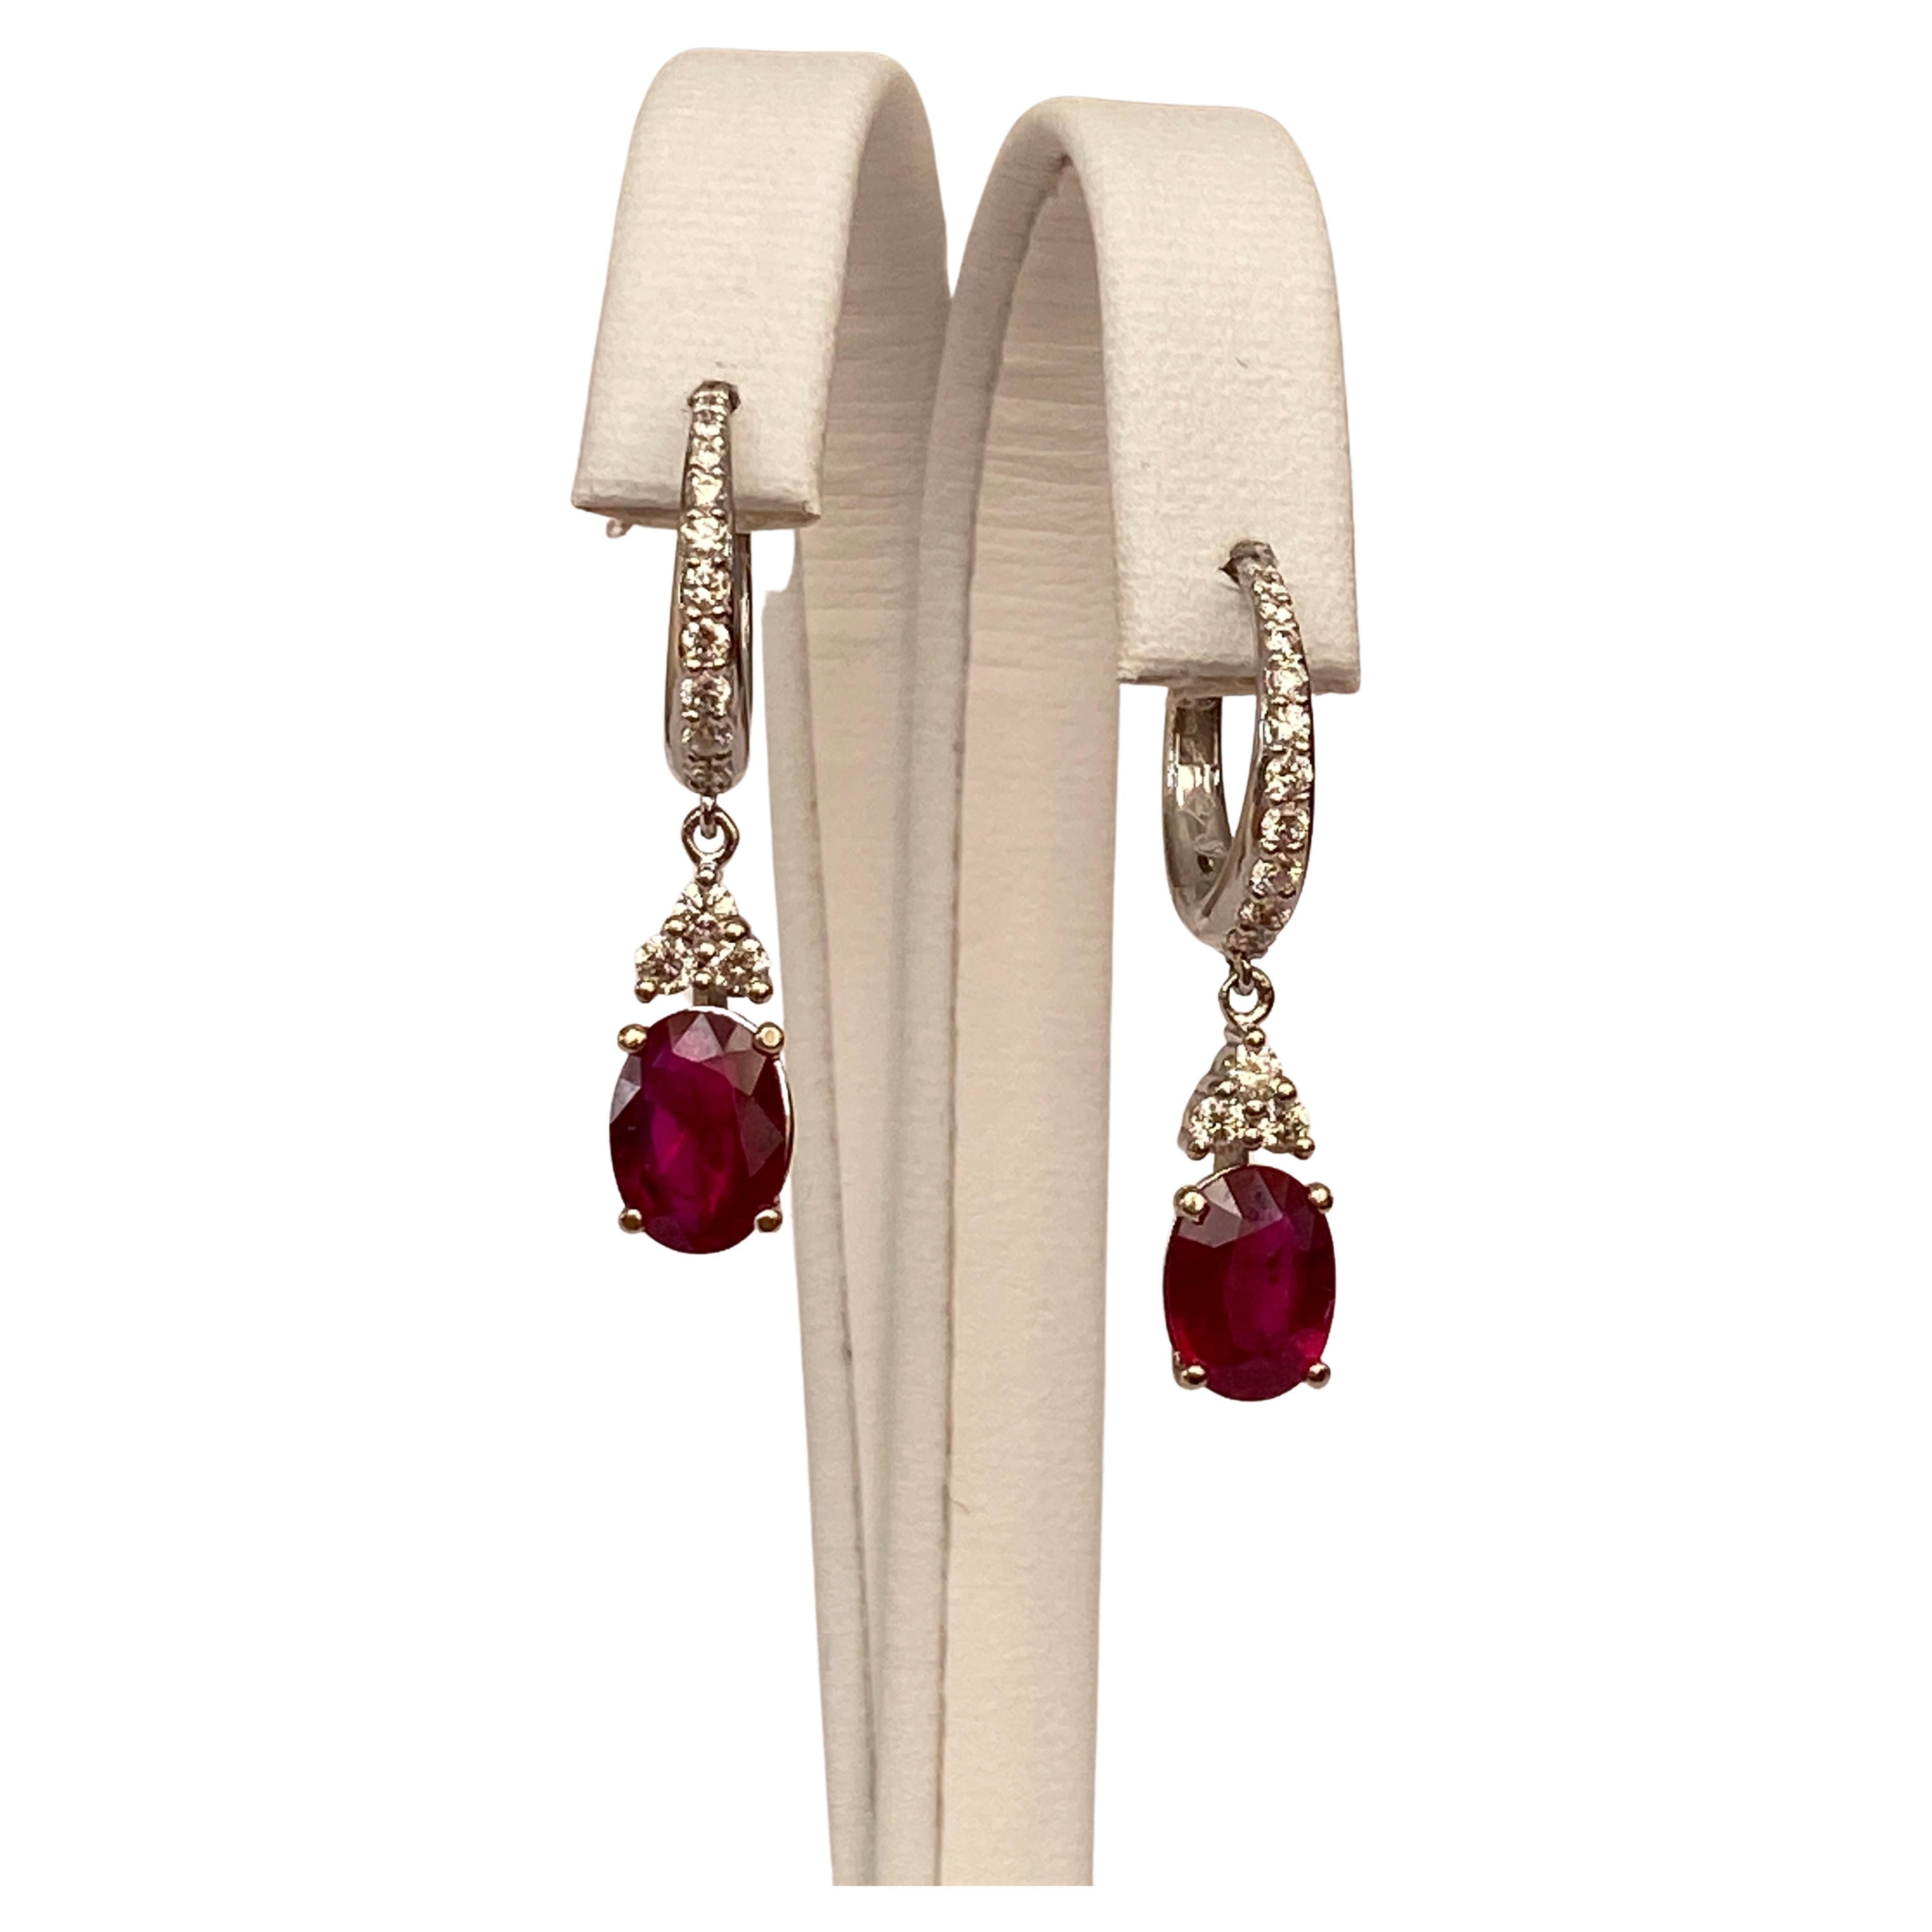 ALGT Certified 18 Kt. White Gold Earrings with 2.28 Ct Rubies and Diamonds